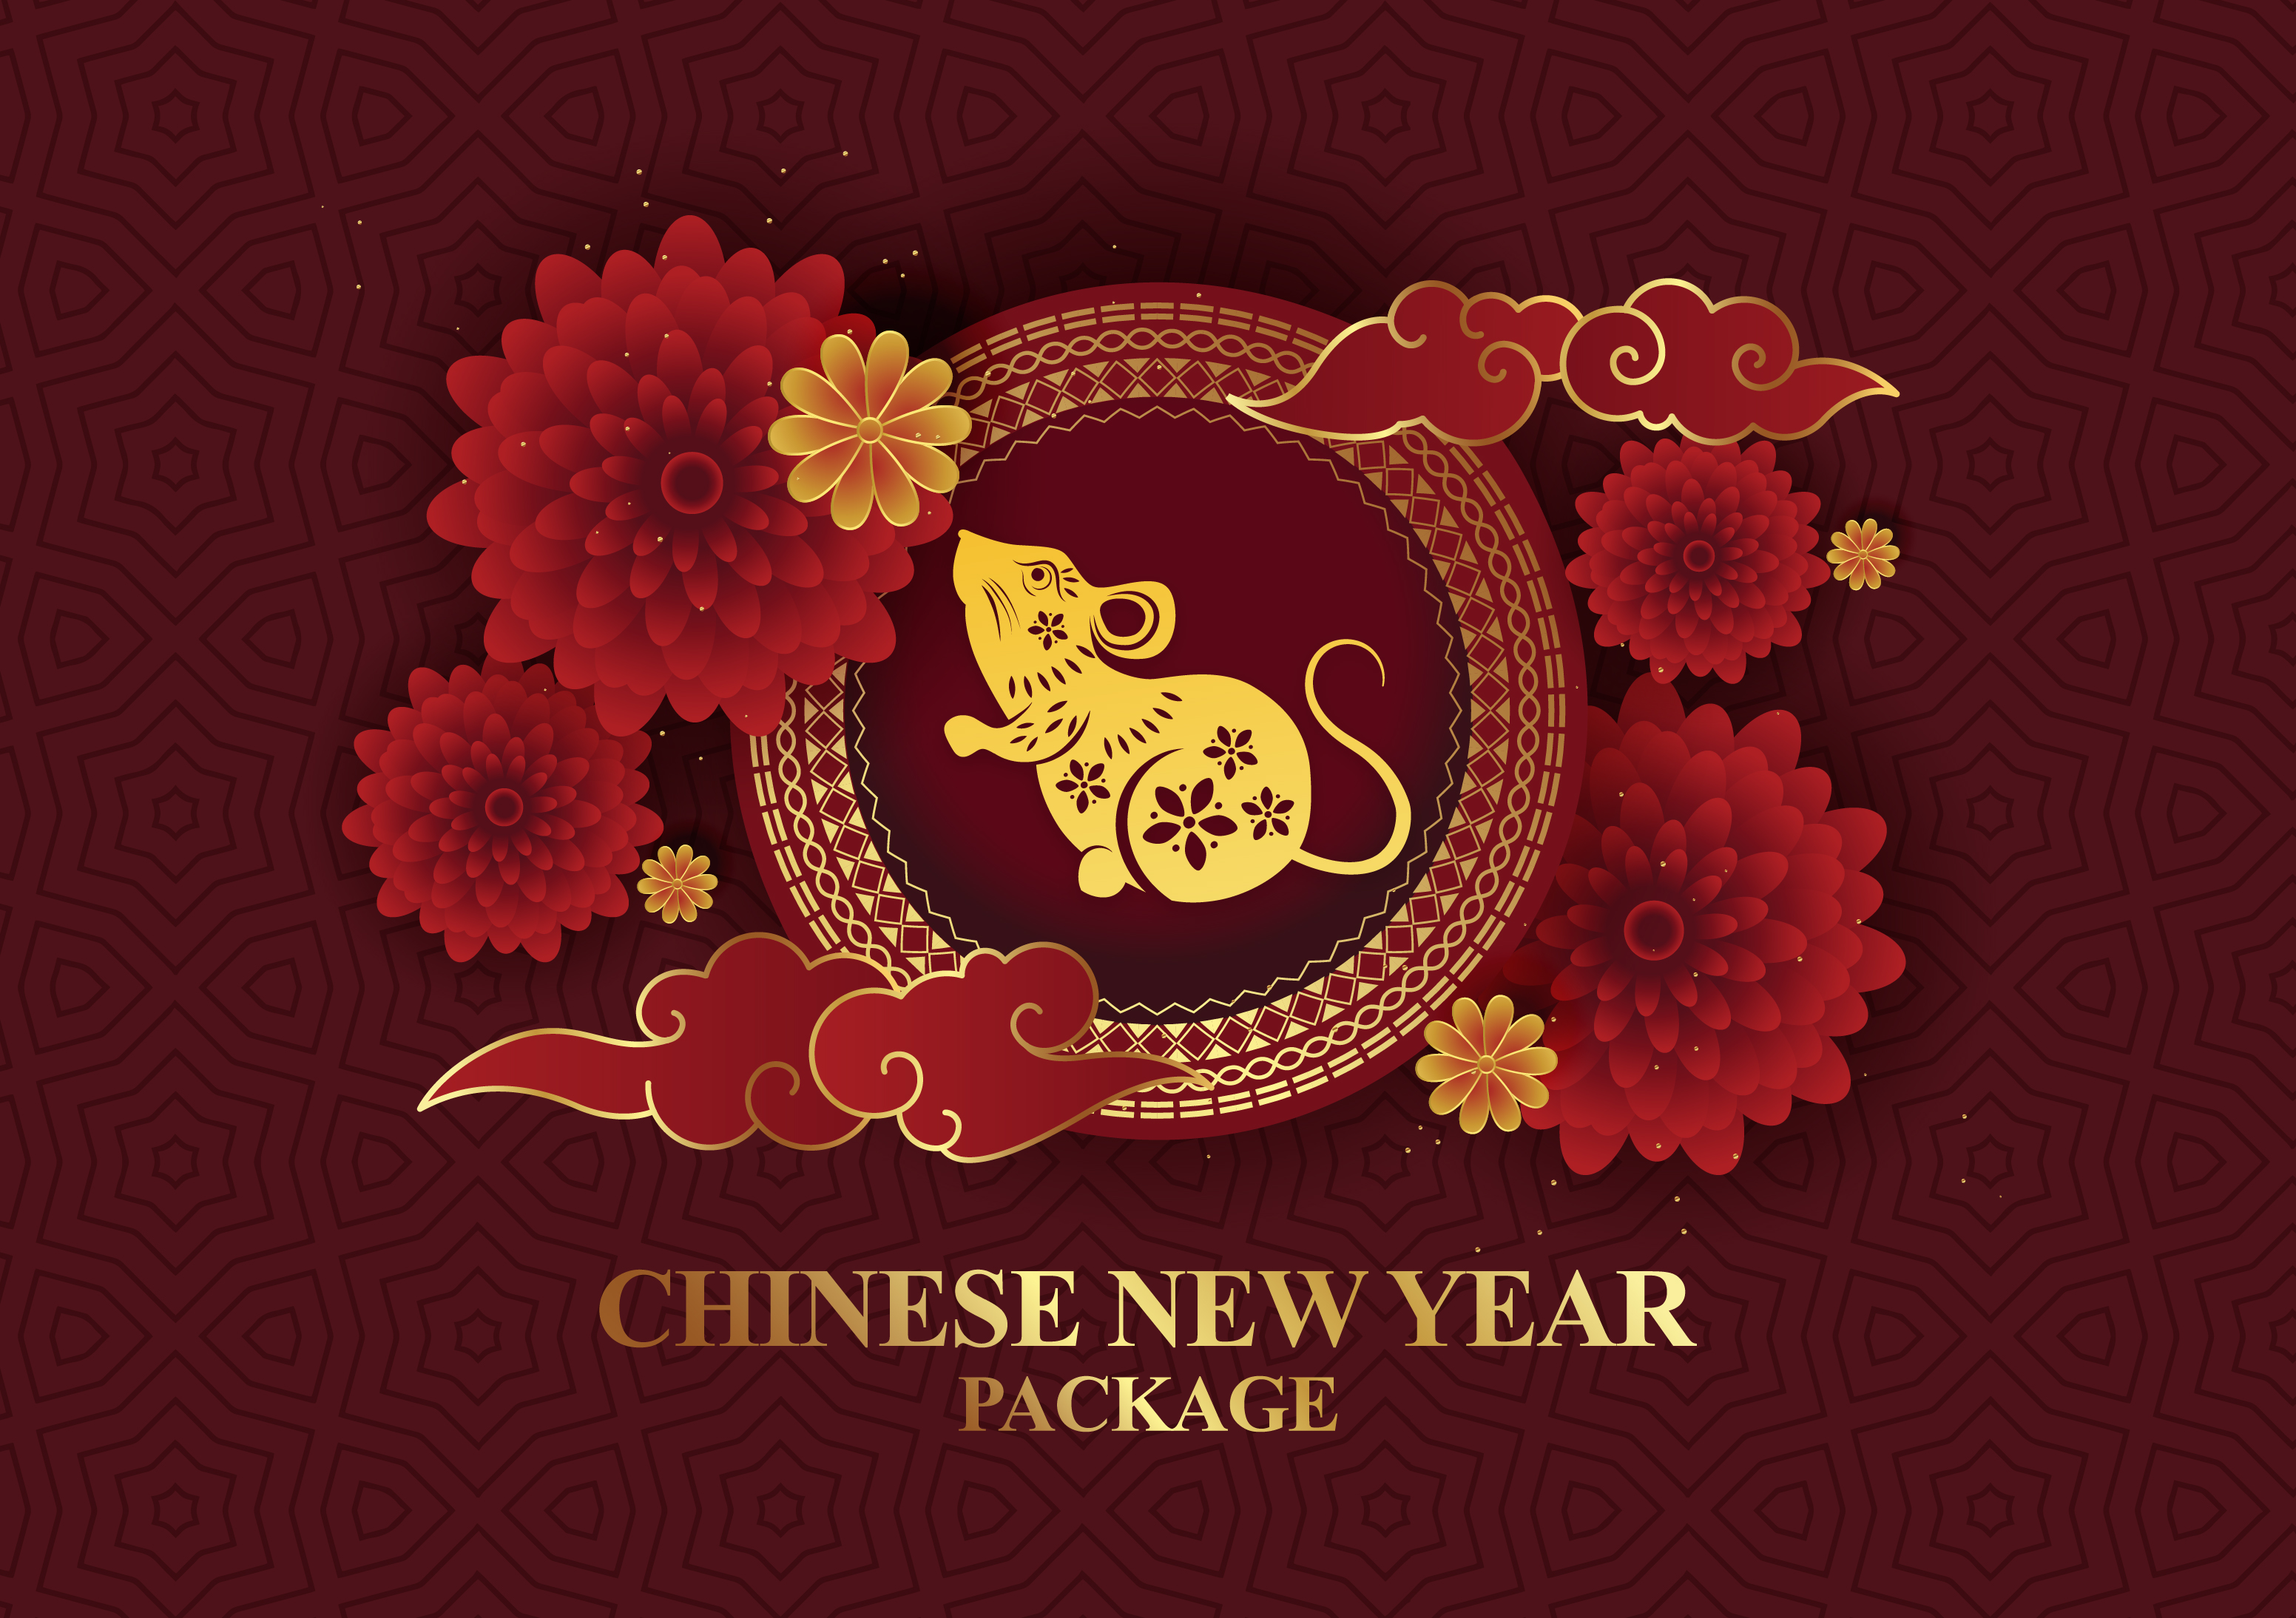 Chinese New Year Package